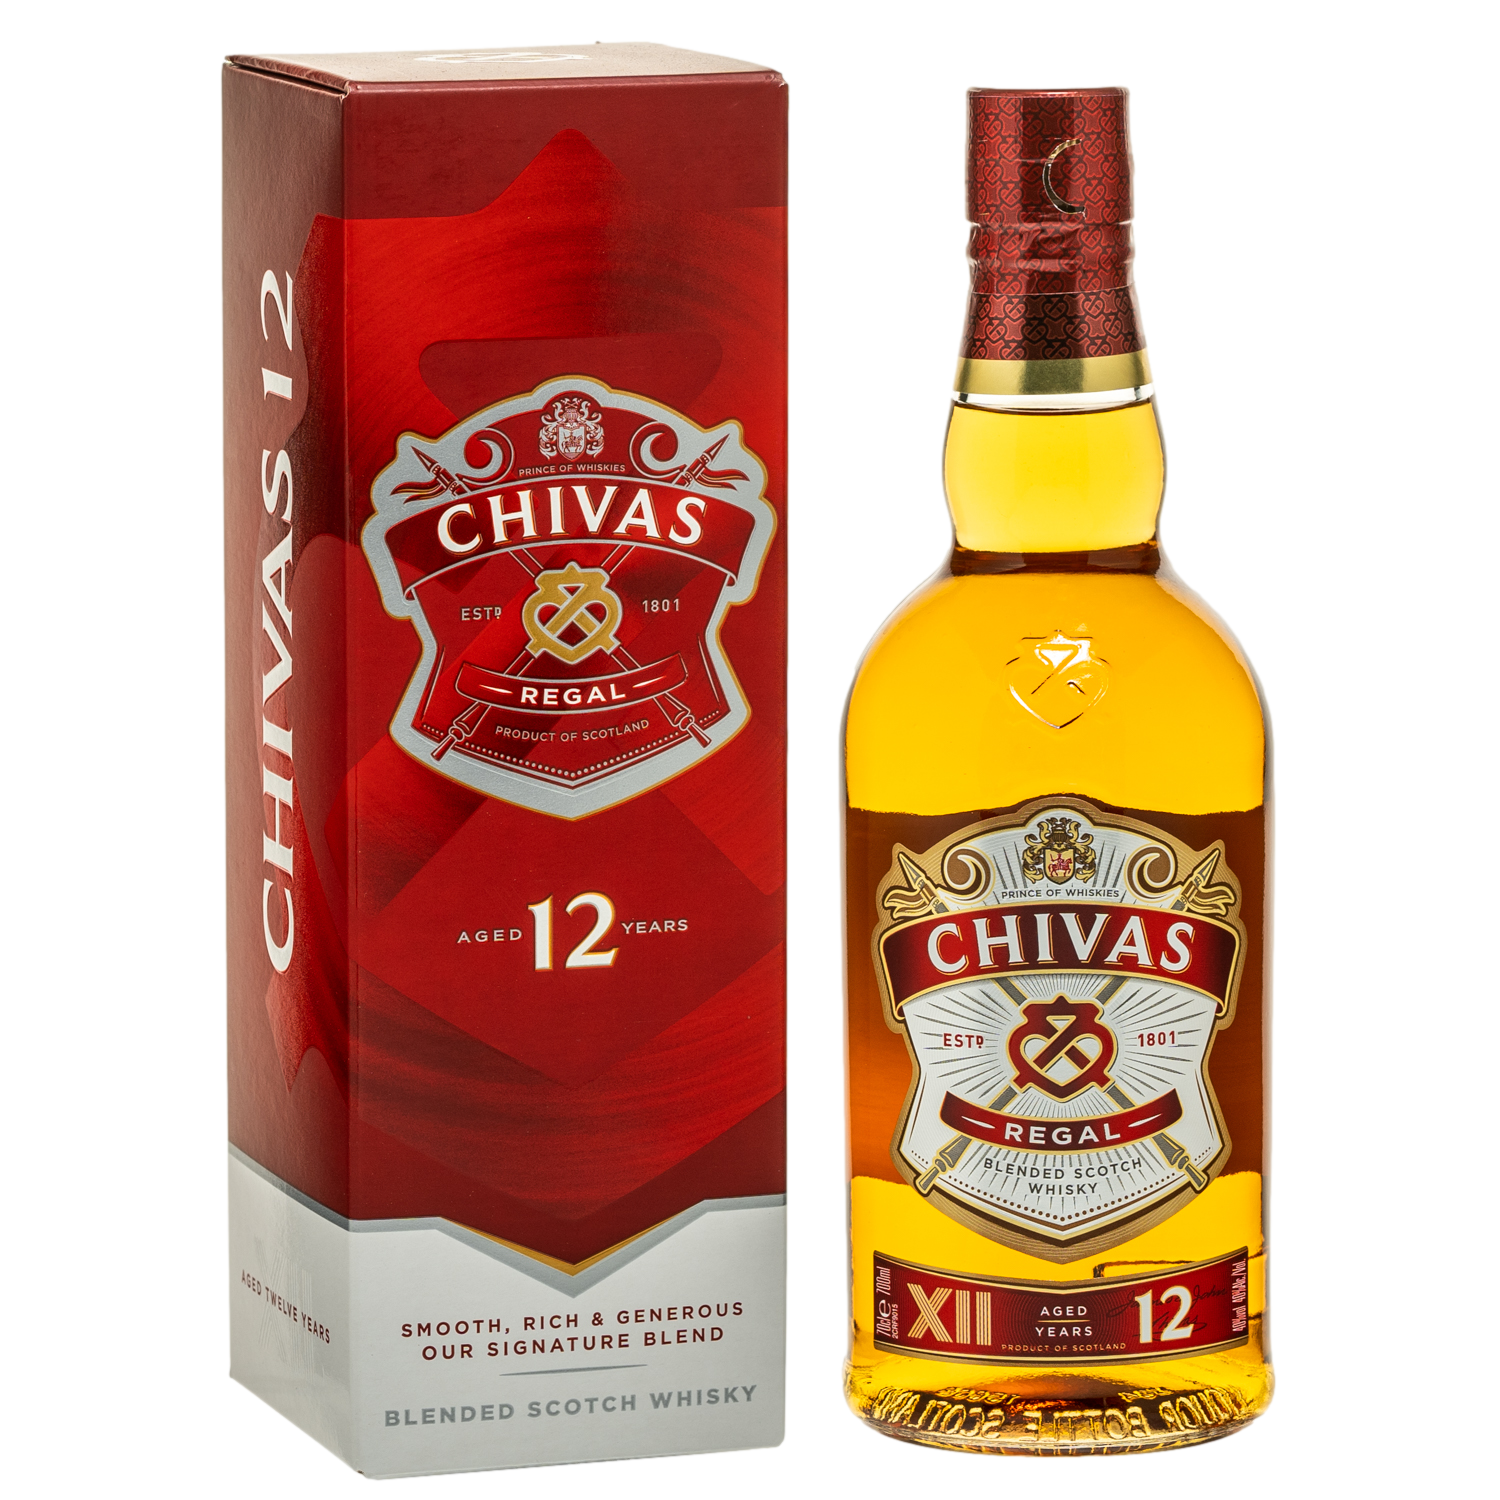 Chivas Regal 12 Jahre Whisky - Blended Scotch Whisky - Barrel Brothers